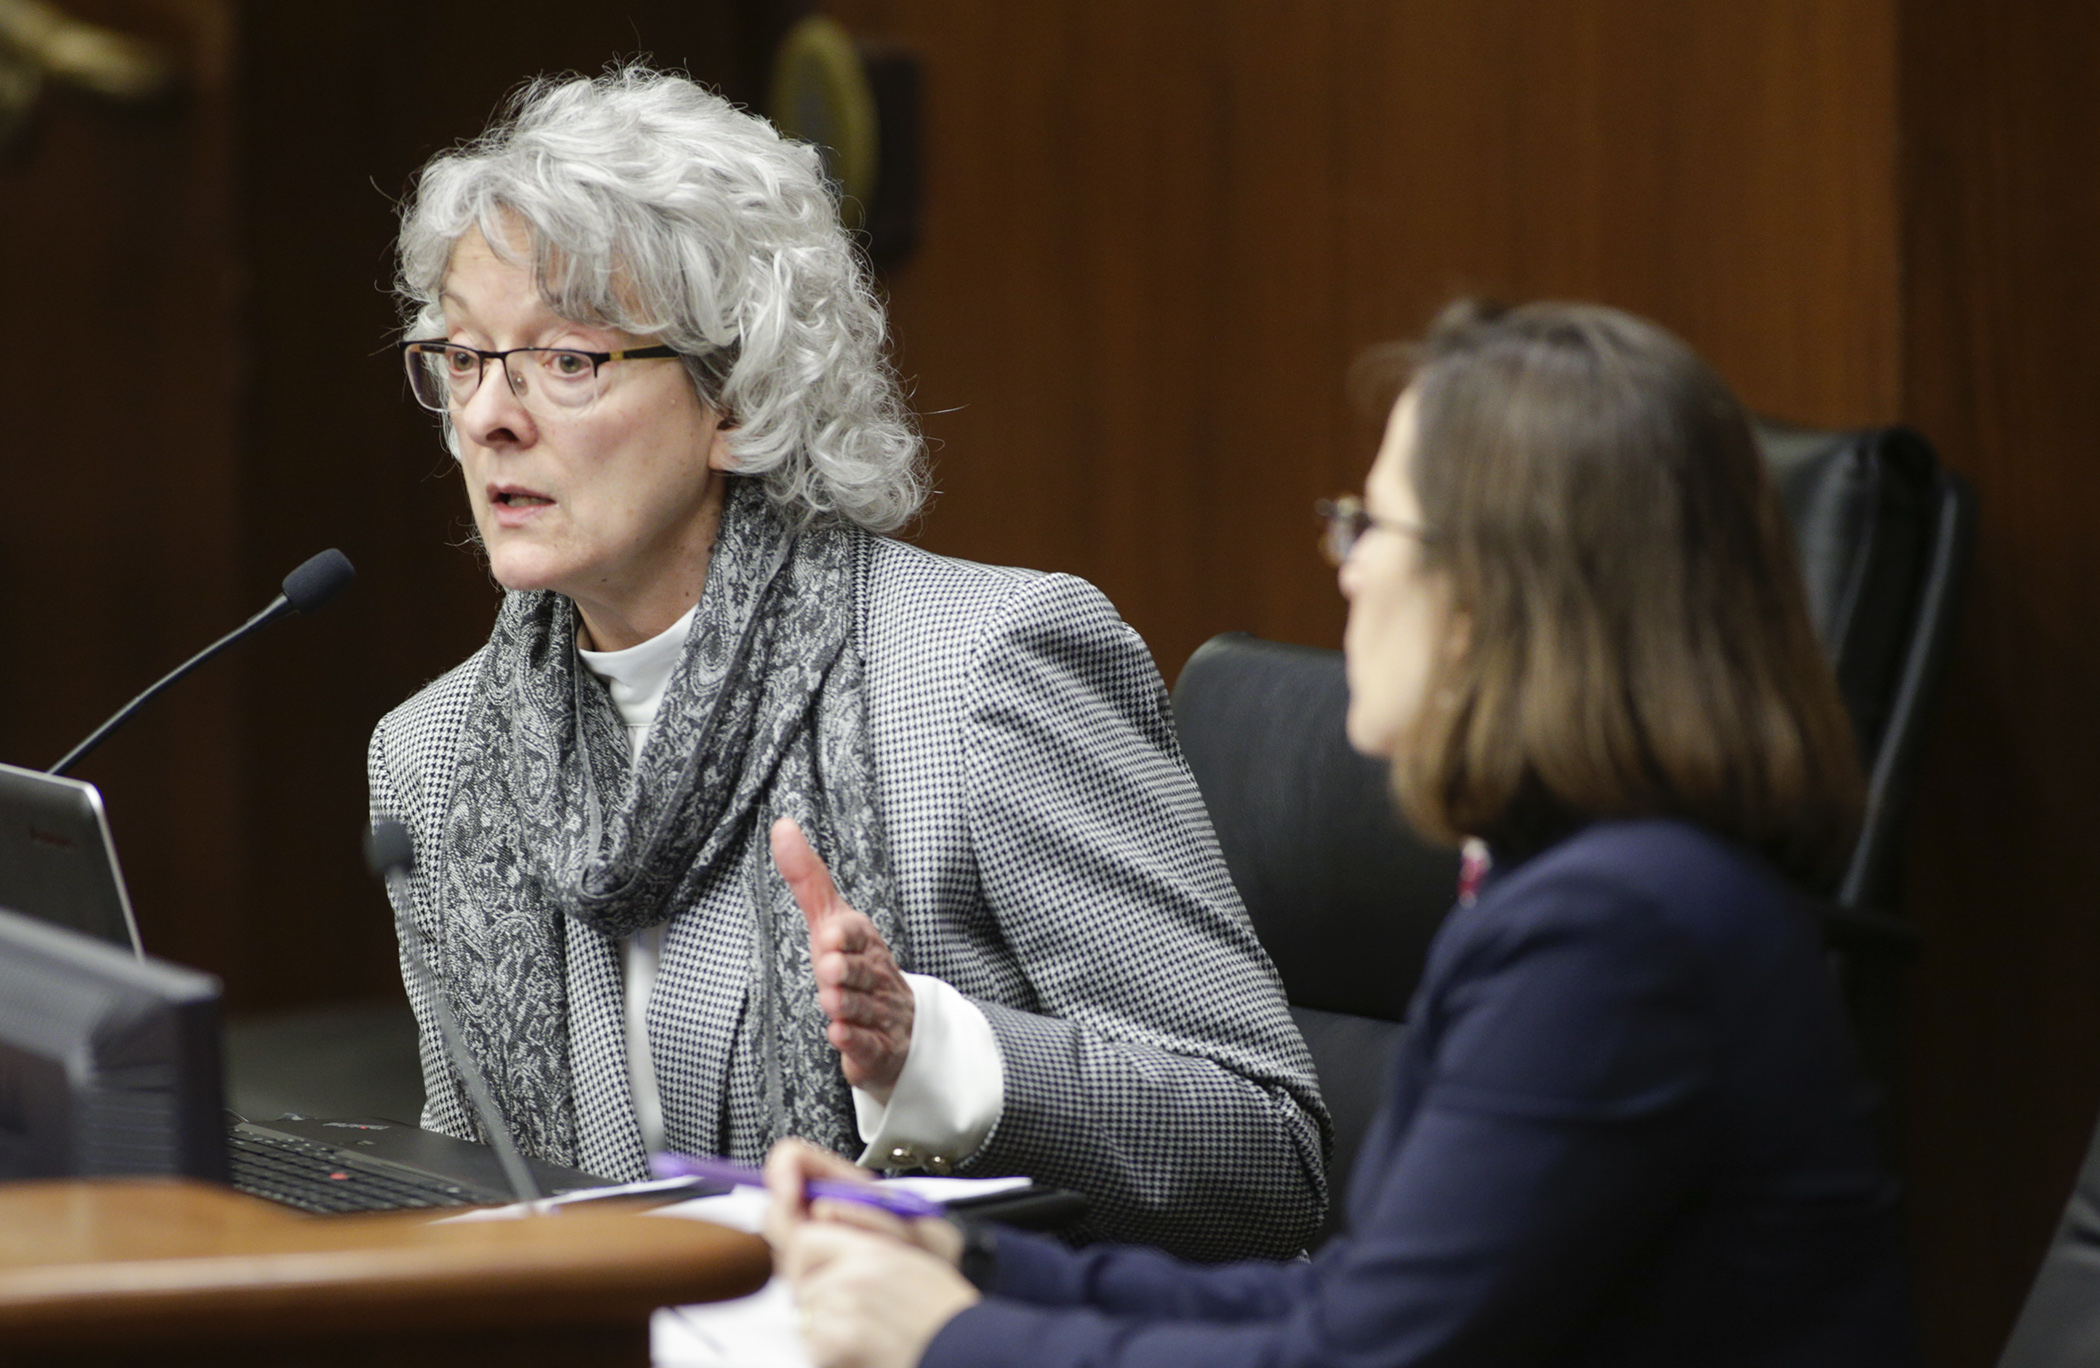 Jody Hauer, evaluation coordinator with the Office of the Legislative Auditor, testifies before the House Education Finance Division March 4 on the OLA’s report on compensatory aid. Photo by Paul Battaglia